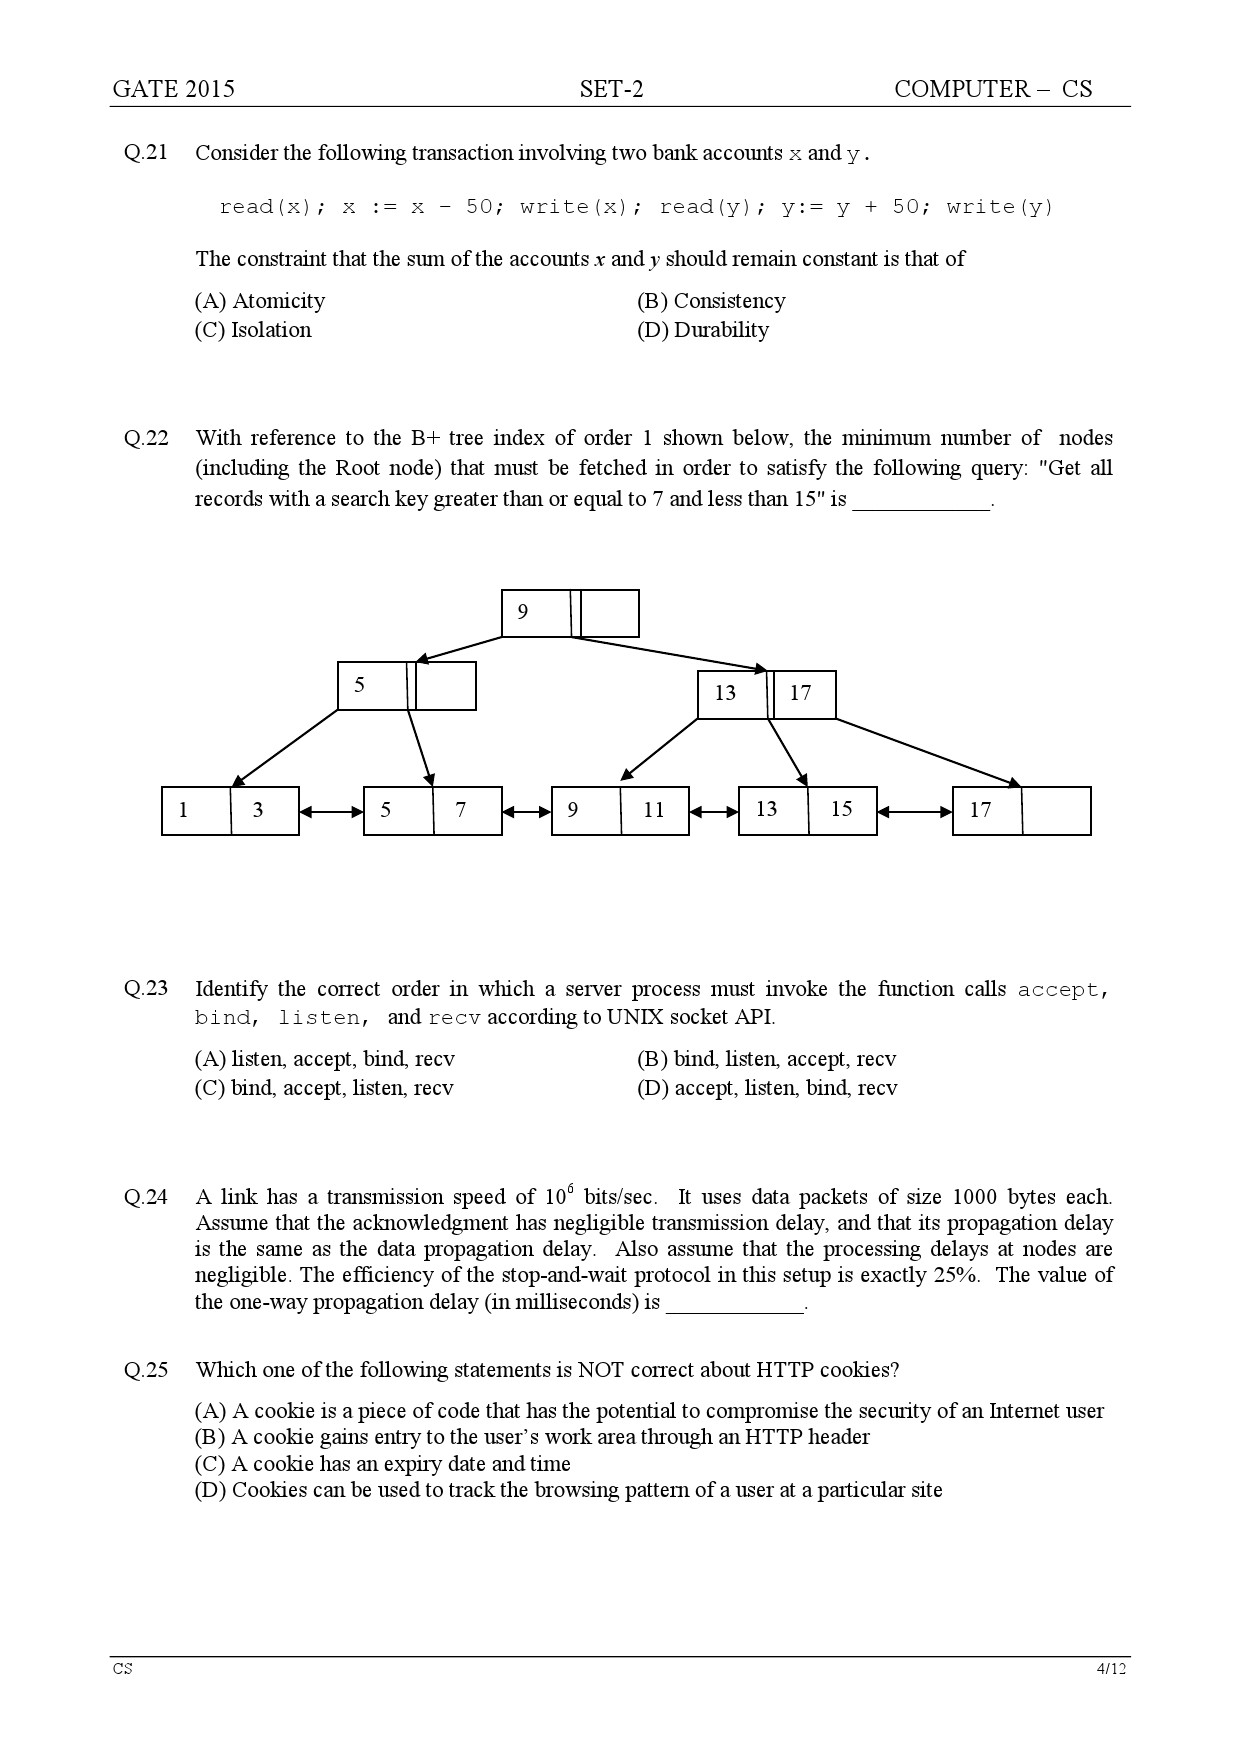 GATE Exam Question Paper 2015 Computer Science and Information Technology Set 2 4